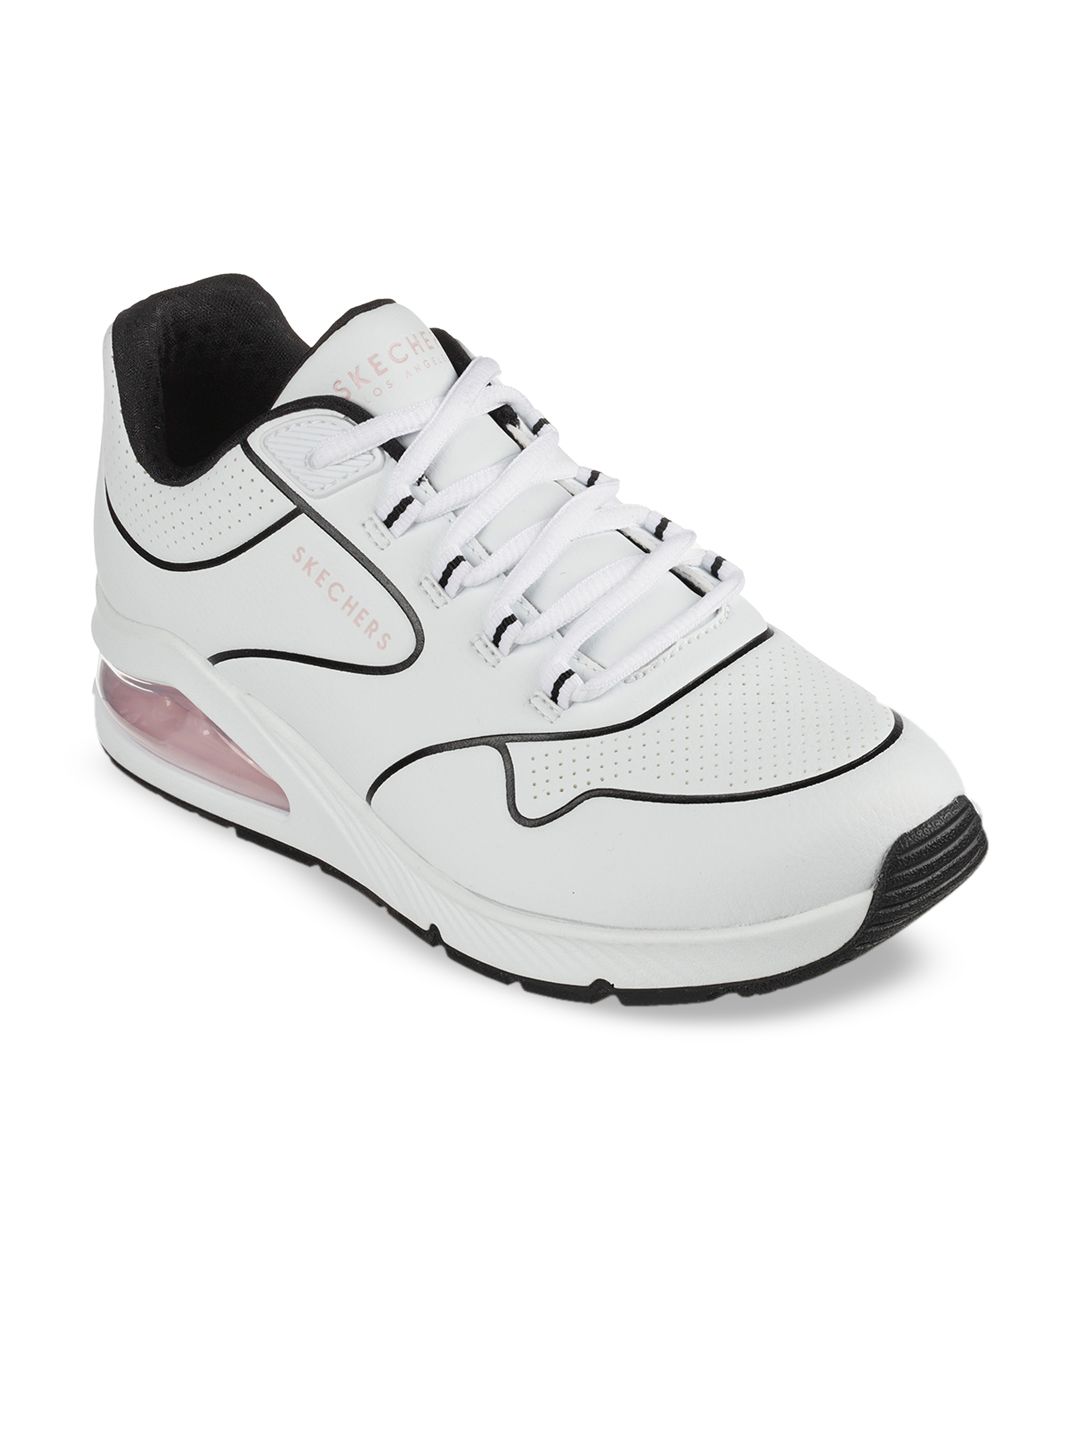 Skechers Women White Perforations Sneakers Price in India